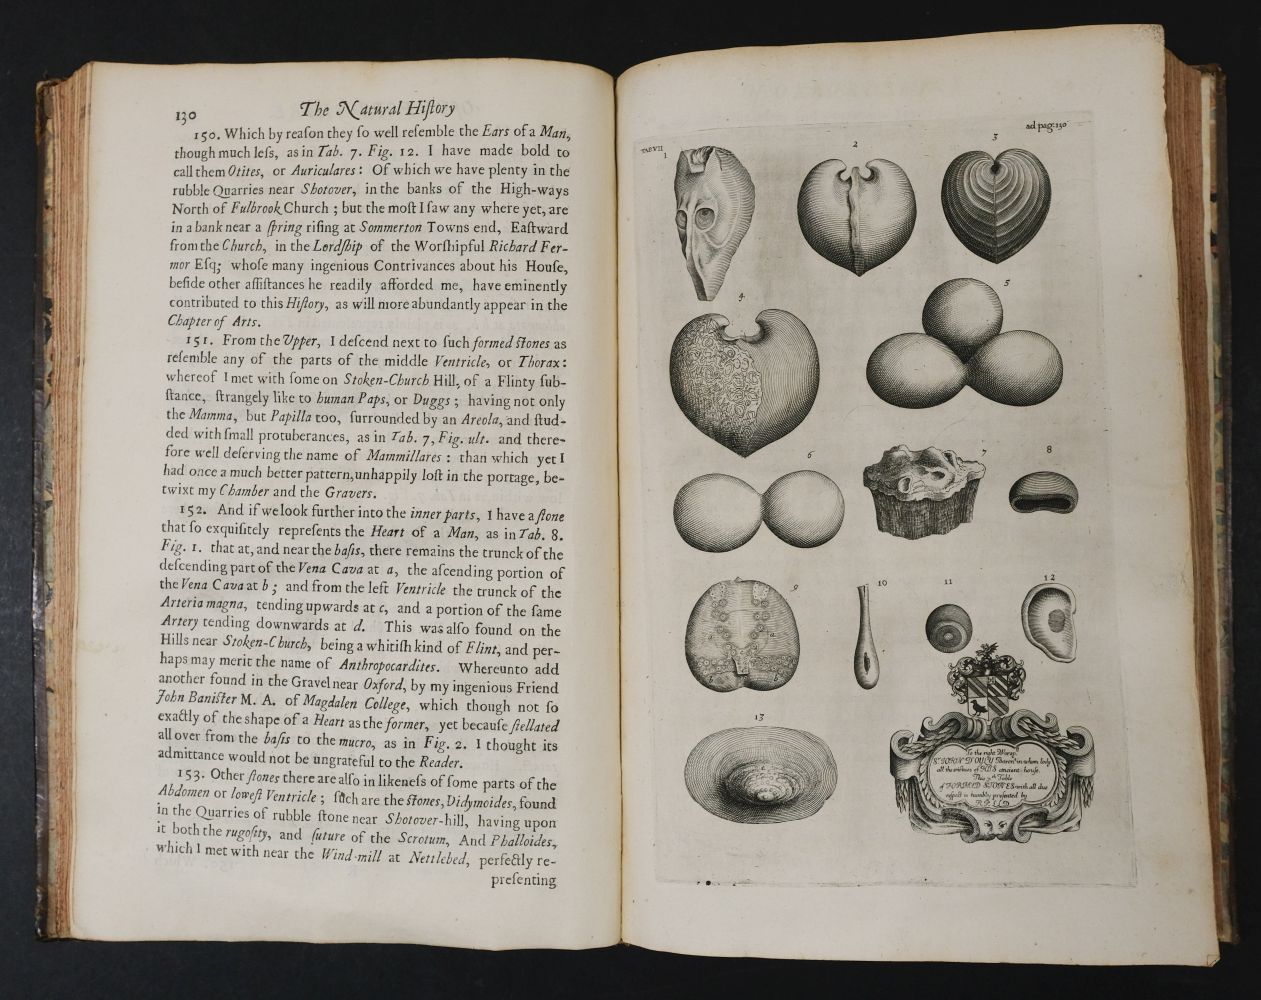 Plot (Robert). The Natural History of Oxfordshire, 1677 - Image 8 of 11